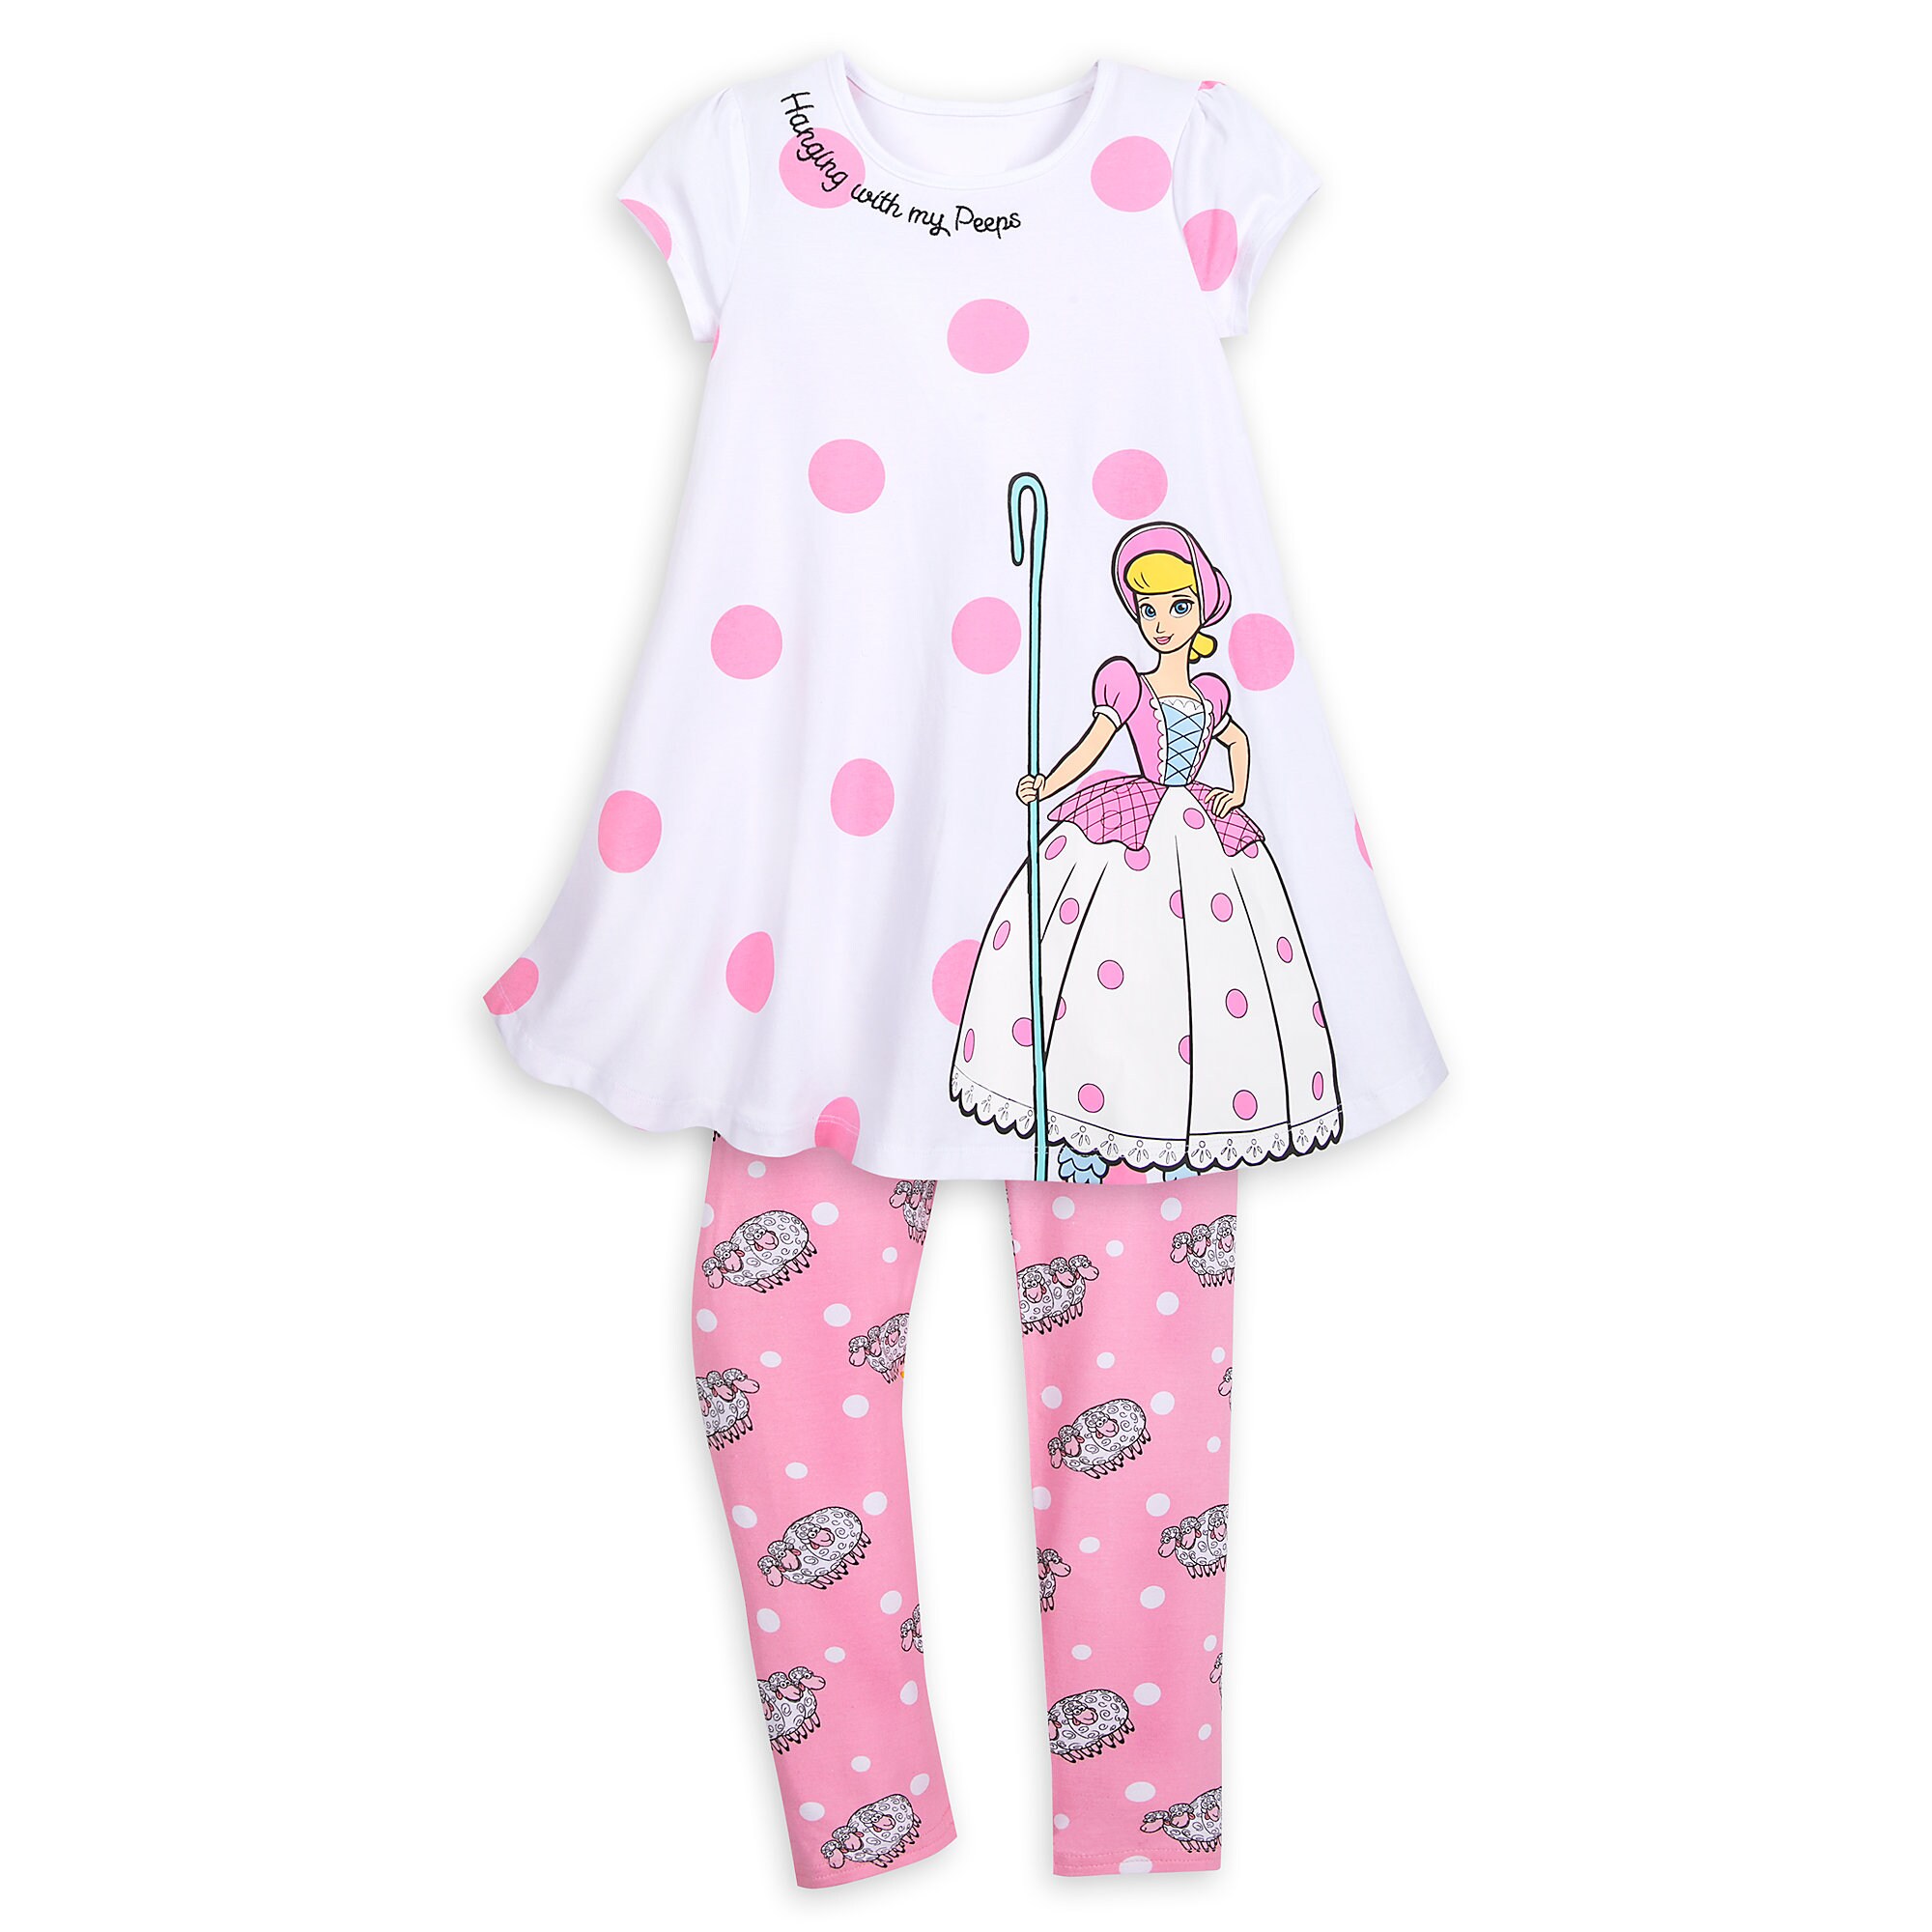 Bo Peep Top and Leggings Set for Girls - Toy Story 4